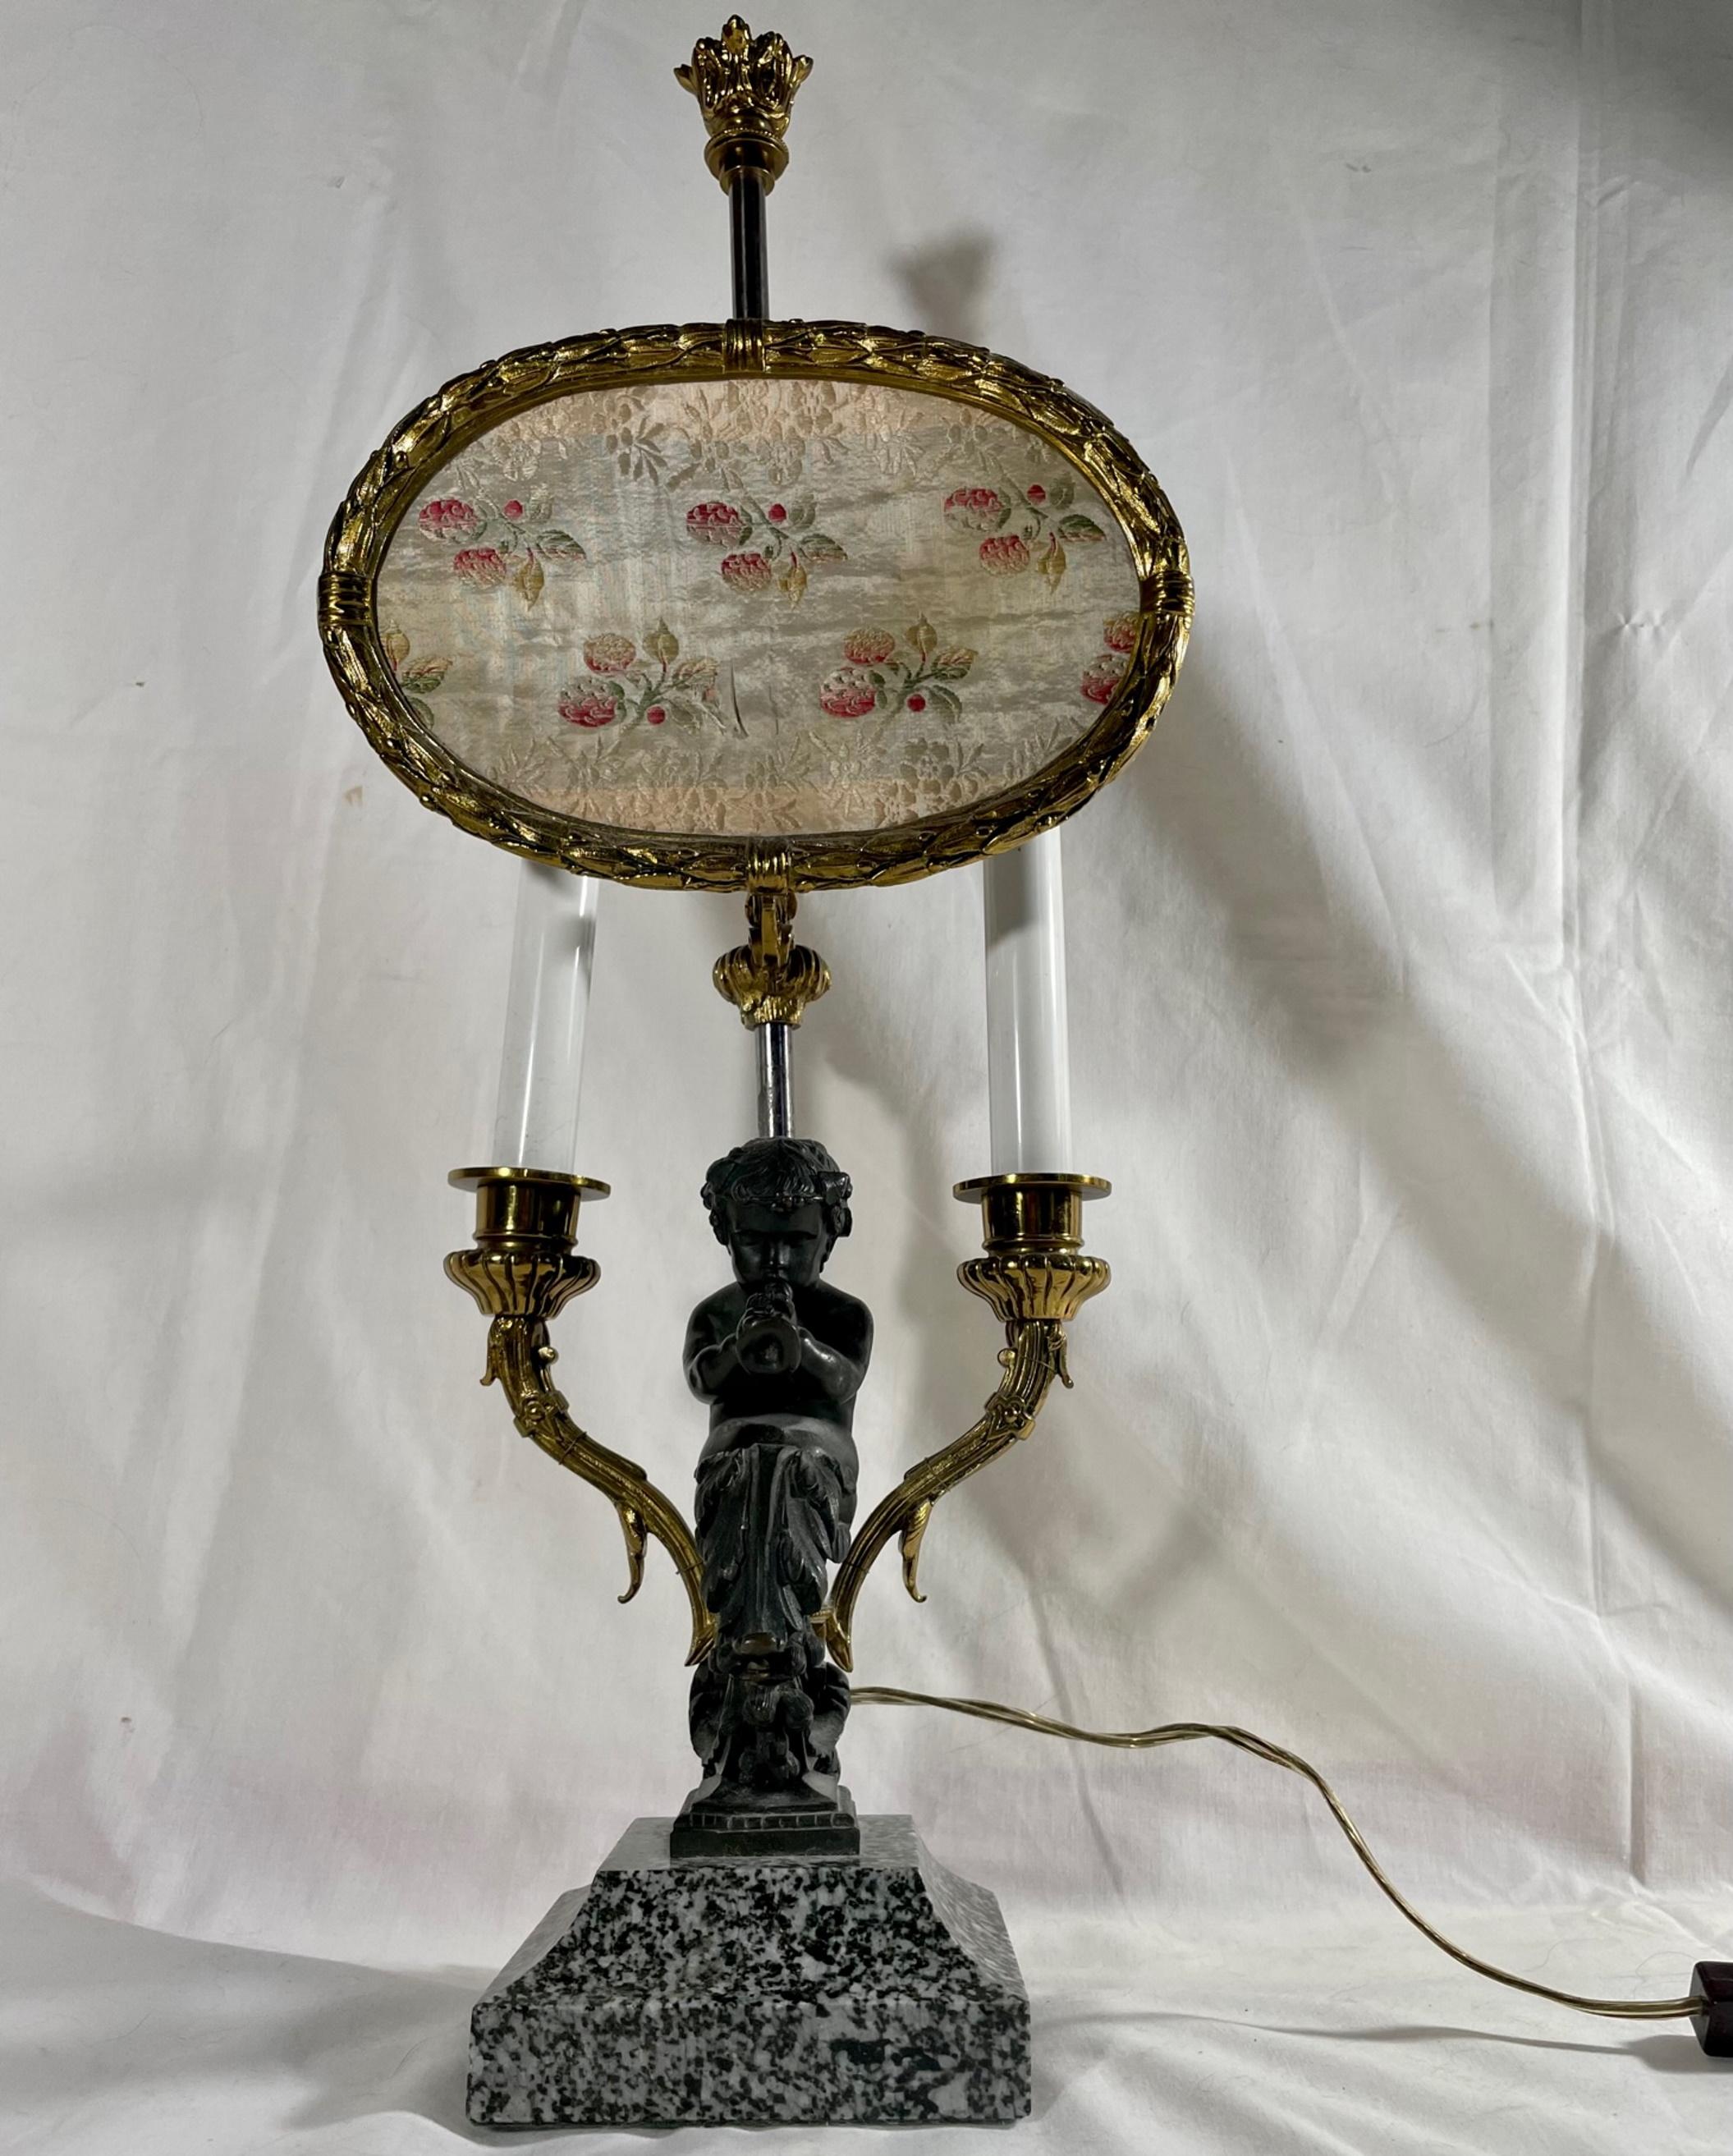 19th Century Louis XV Style Bronze Two Light Table Lamp with Adjustable “Pare-feu“.

Elegant late 19th century Louis XV style table lamp with adjustable screen. It is made with a high level of refinement in casting and chasing the bronze figure.